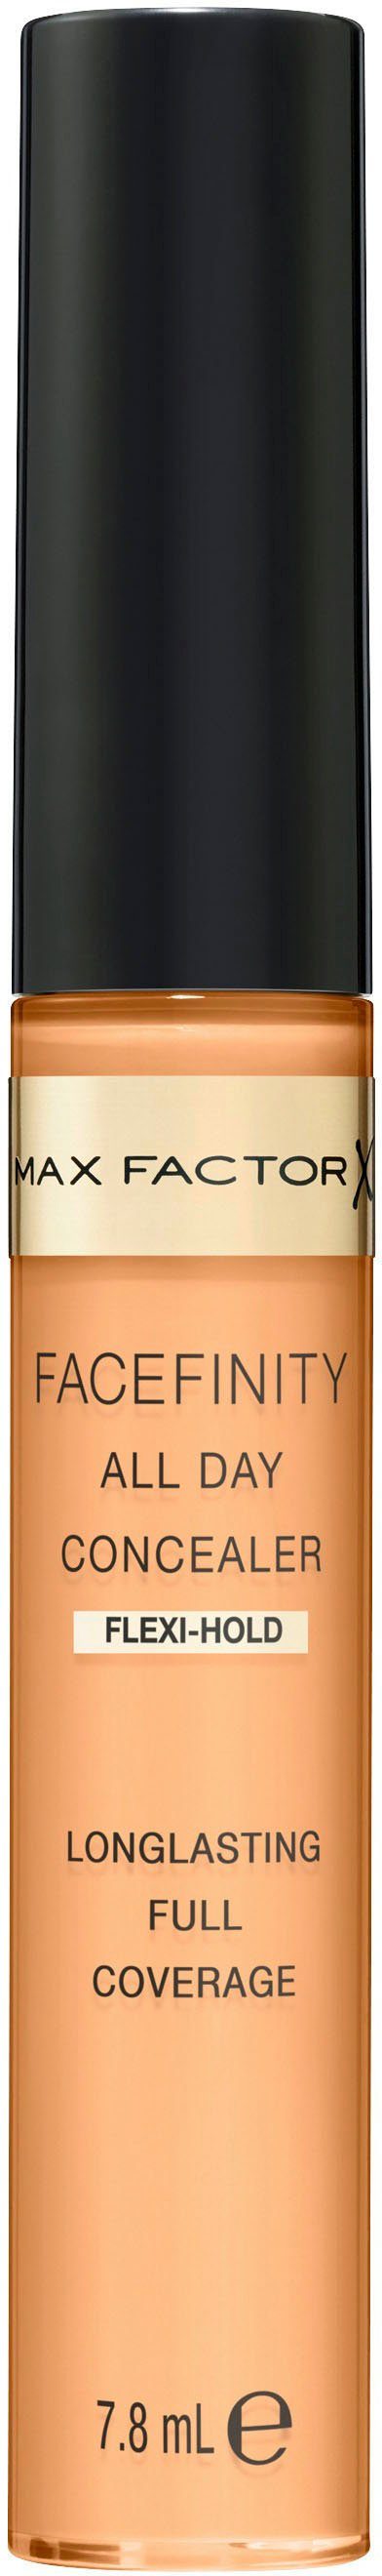 Day FACEFINITY Concealer 70 MAX FACTOR Flawless All